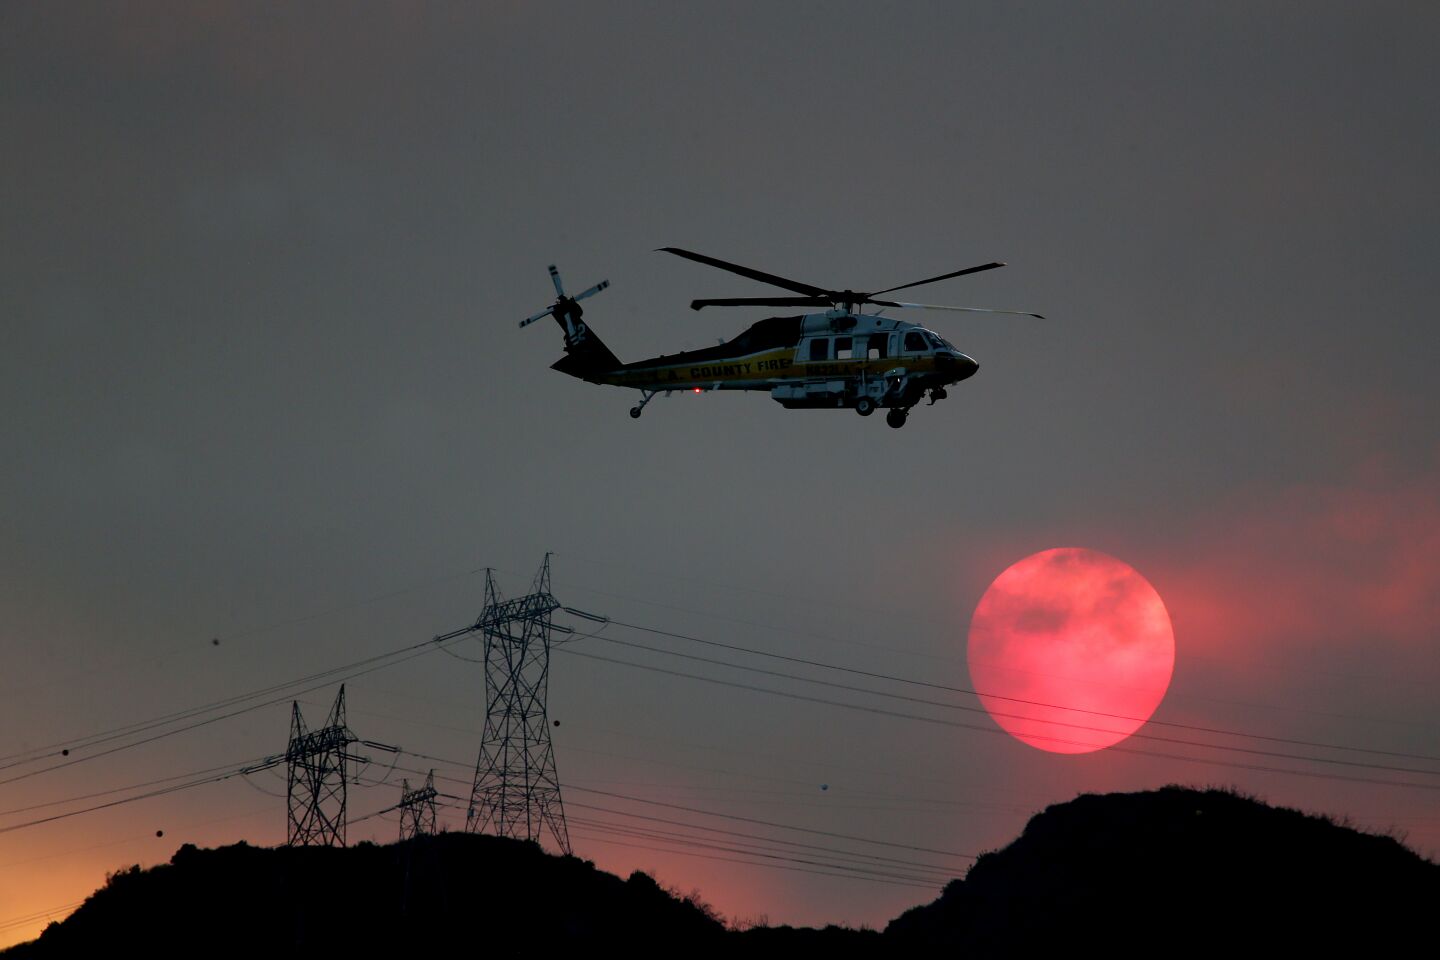 A firefighting helicopter makes an approach to drop water on the Ranch 2 fire in the hills above a cluster of homes along the San Gabriel River near Azusa.